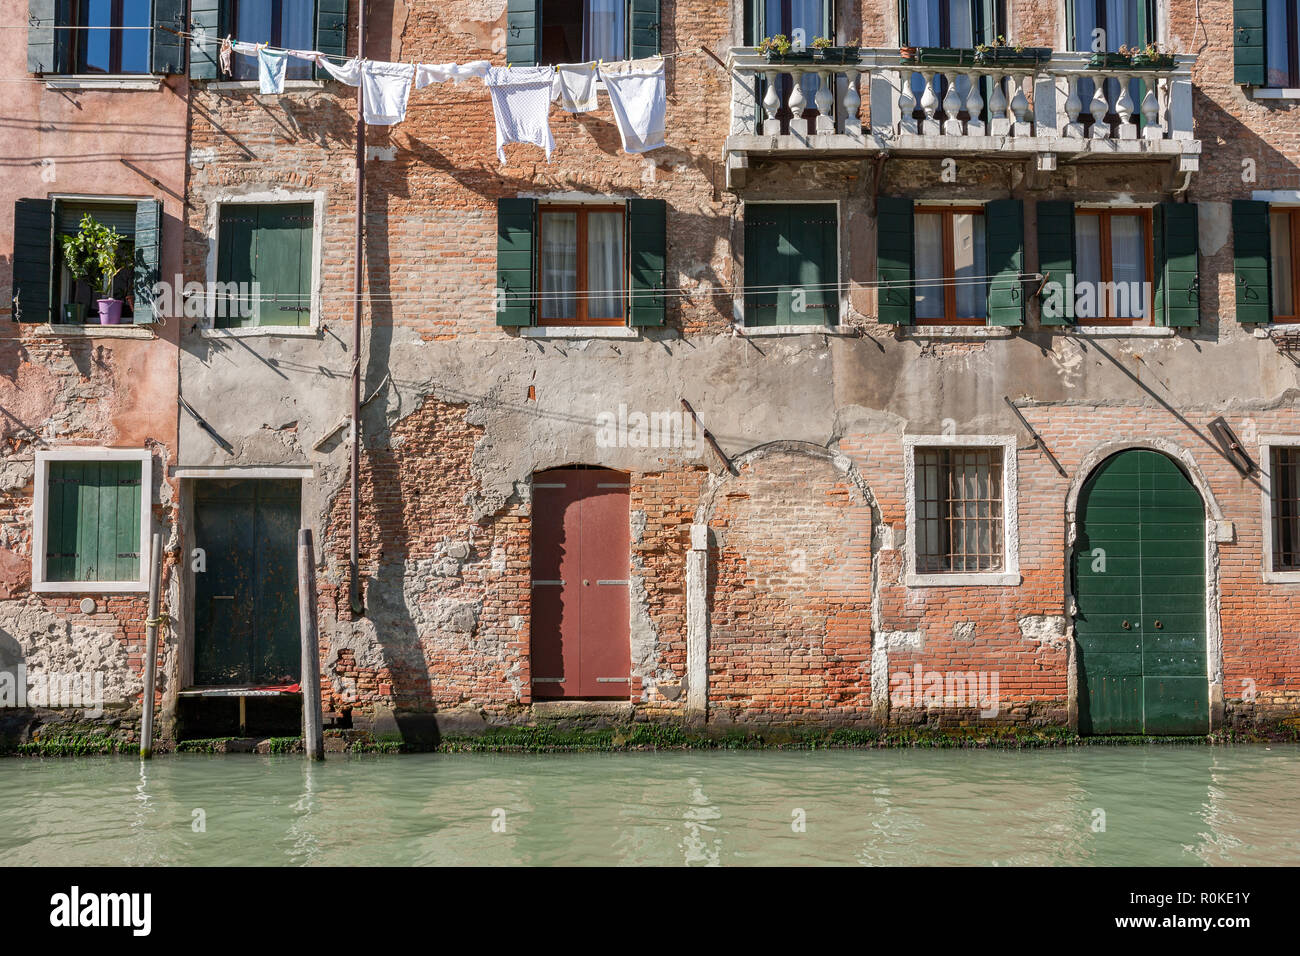 Old brick buildings and painted green shutters with white washing hanging out to dry on a canal Venice Italy Stock Photo